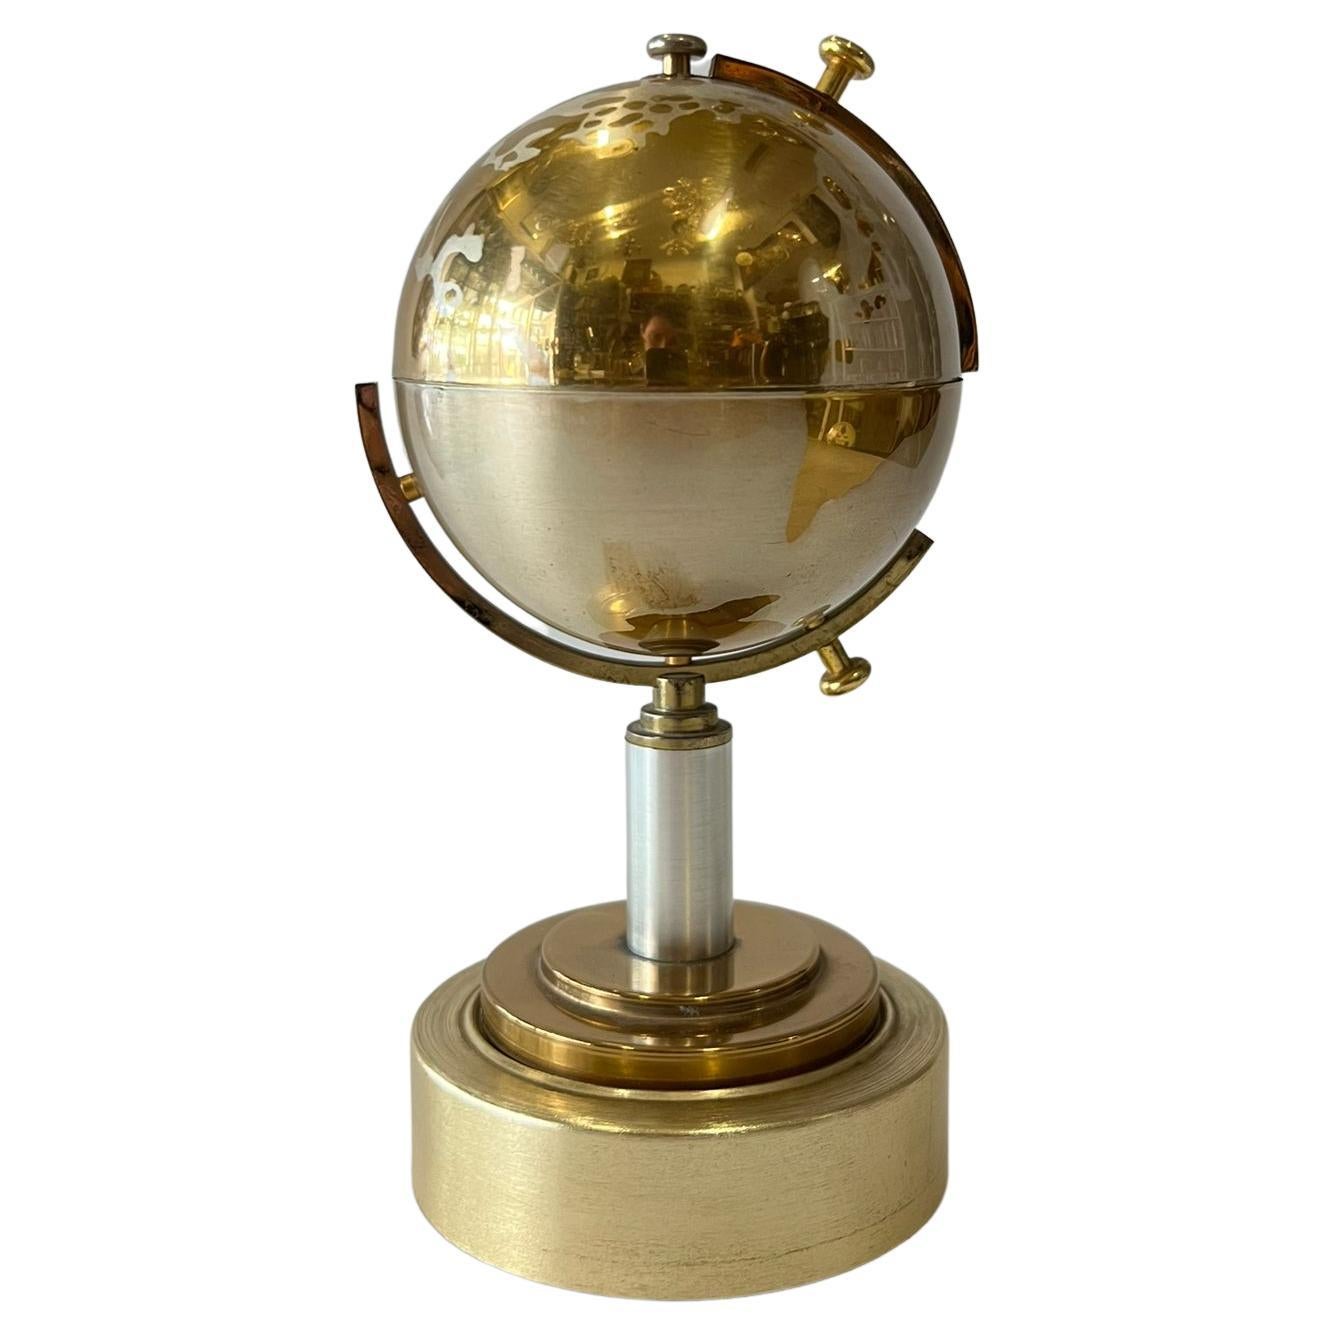 Mid-20th Century Globe Cigarette Dispenser with Music Playing Globe Lighter, Brass, Germany, 1950 For Sale